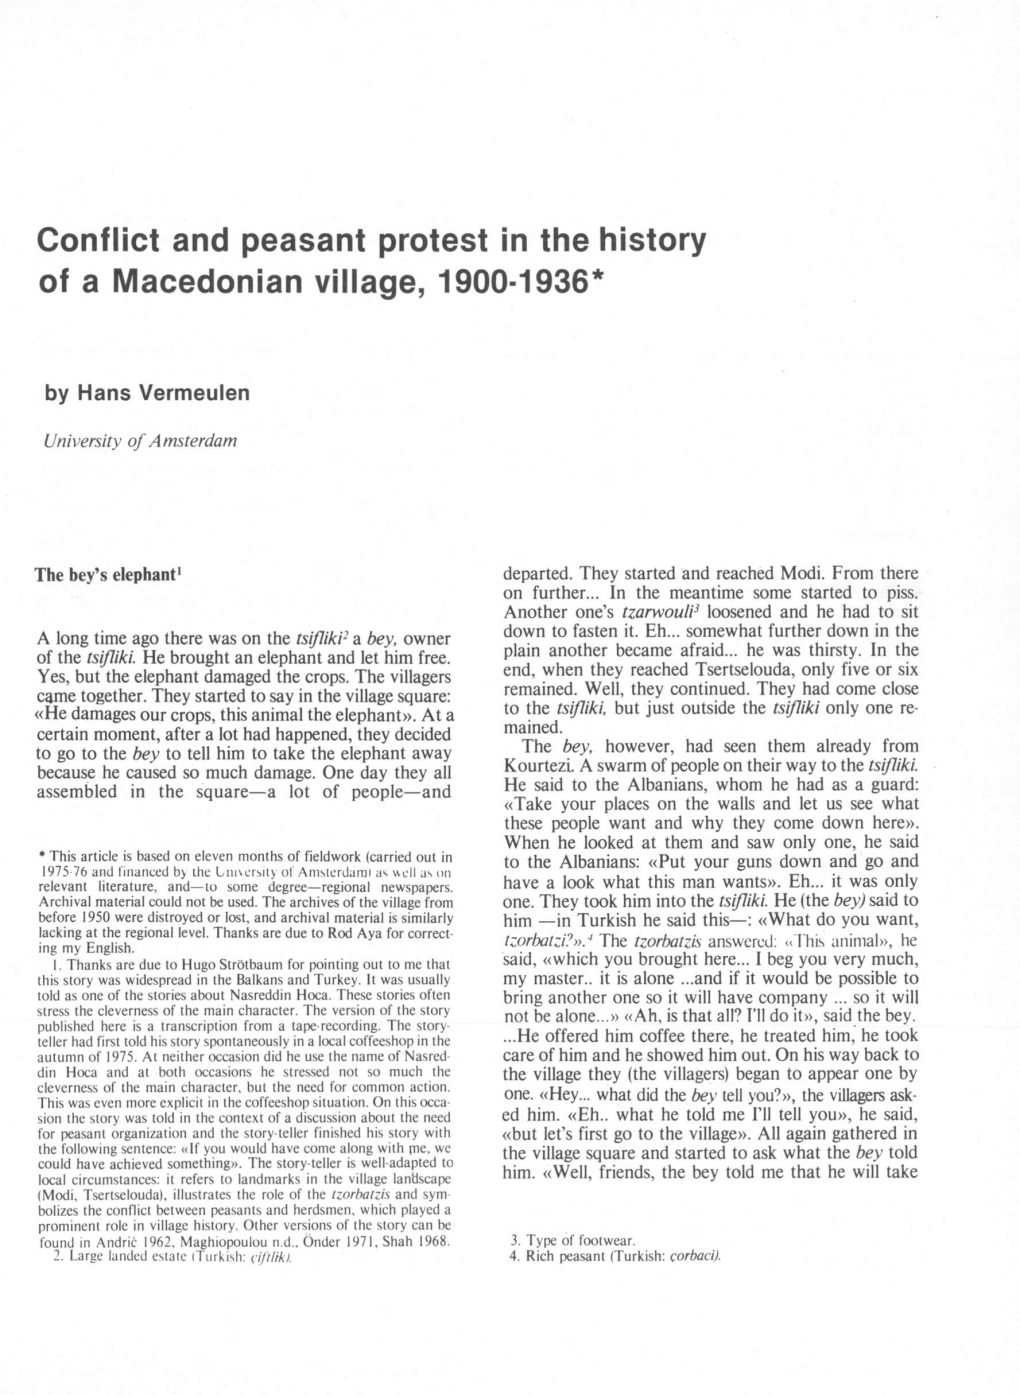 Conflict and Peasant Protest in the History of a Macedonian Village, 1900-1936*